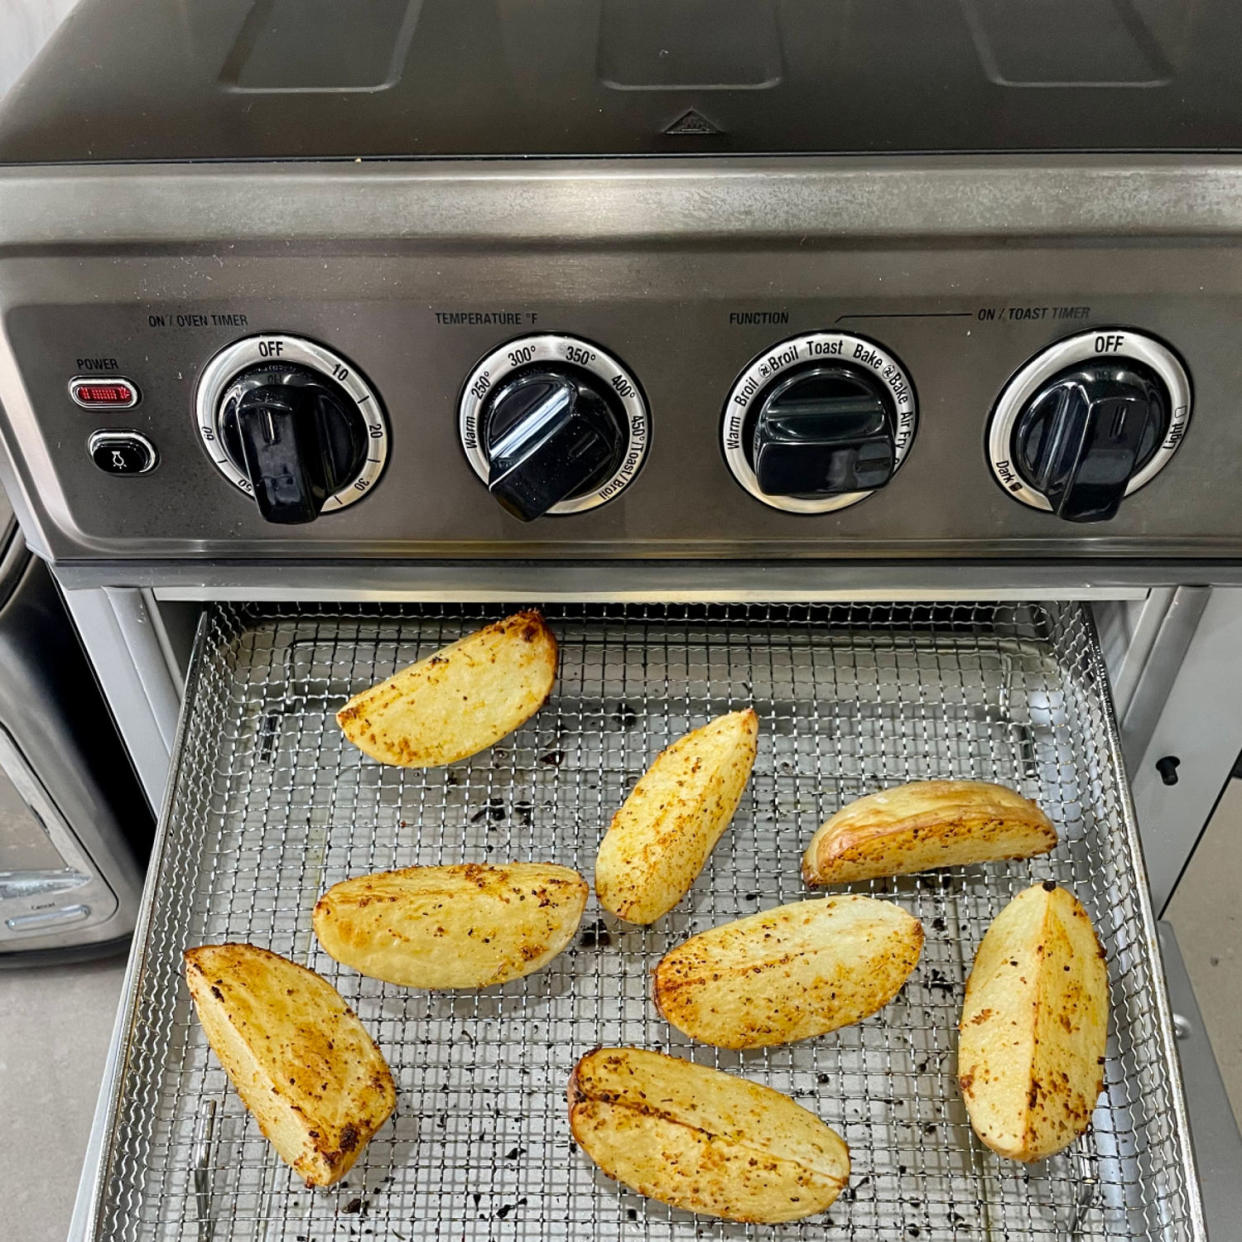 Diced potatoes roasted on the basket tray in the Cuisinart air fryer. (Courtesy of Cory Fernandez)